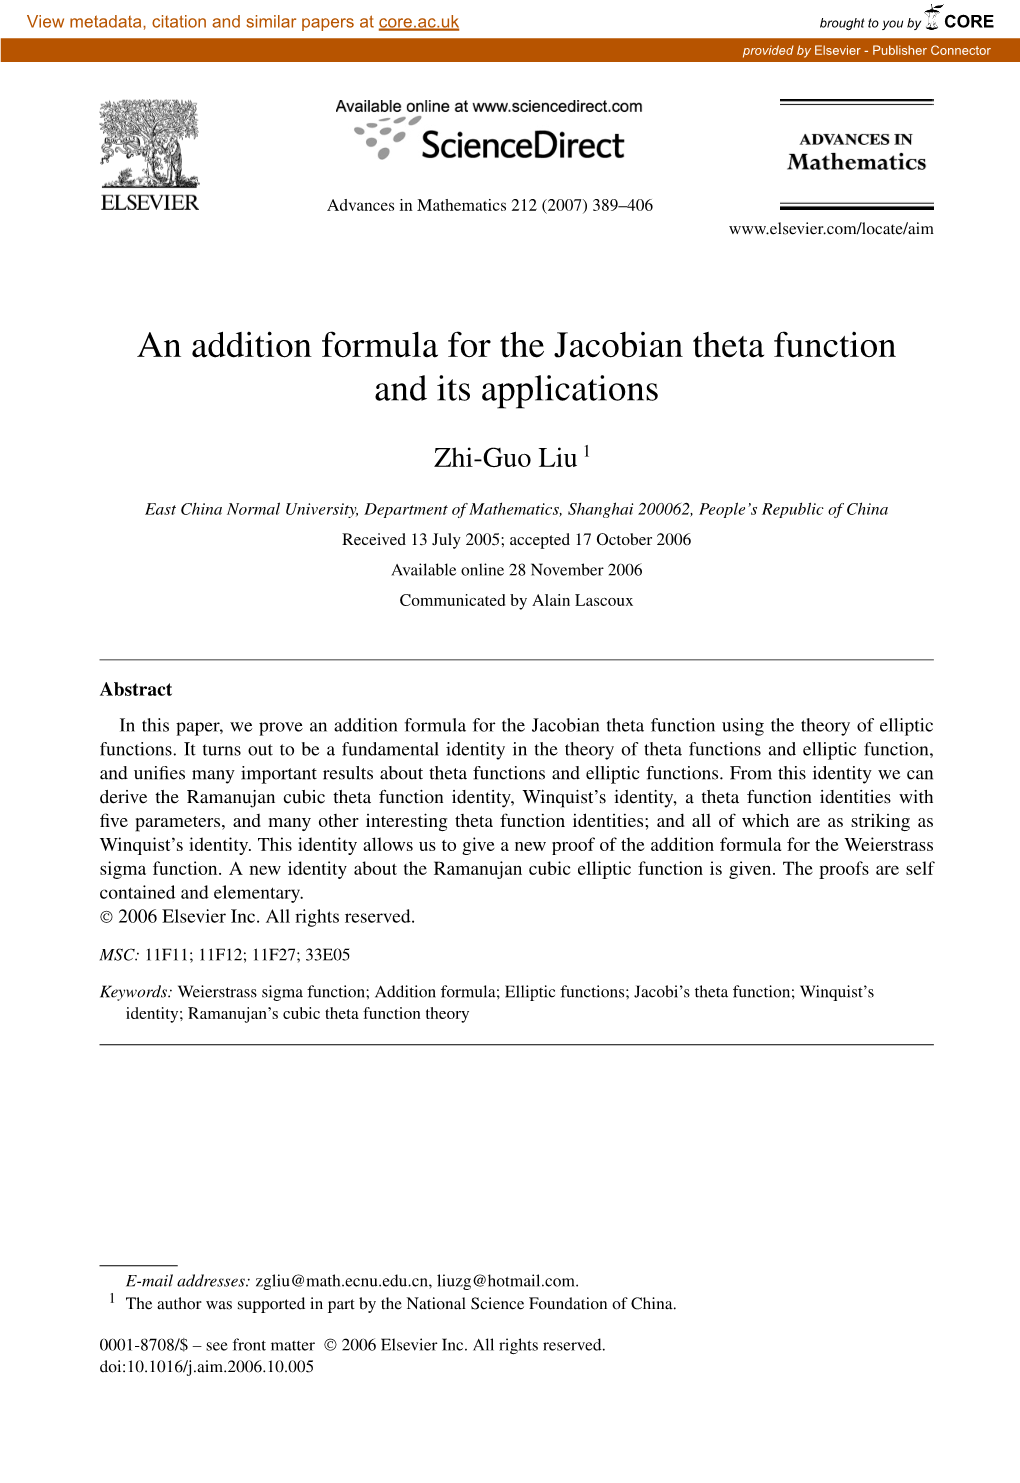 An Addition Formula for the Jacobian Theta Function and Its Applications